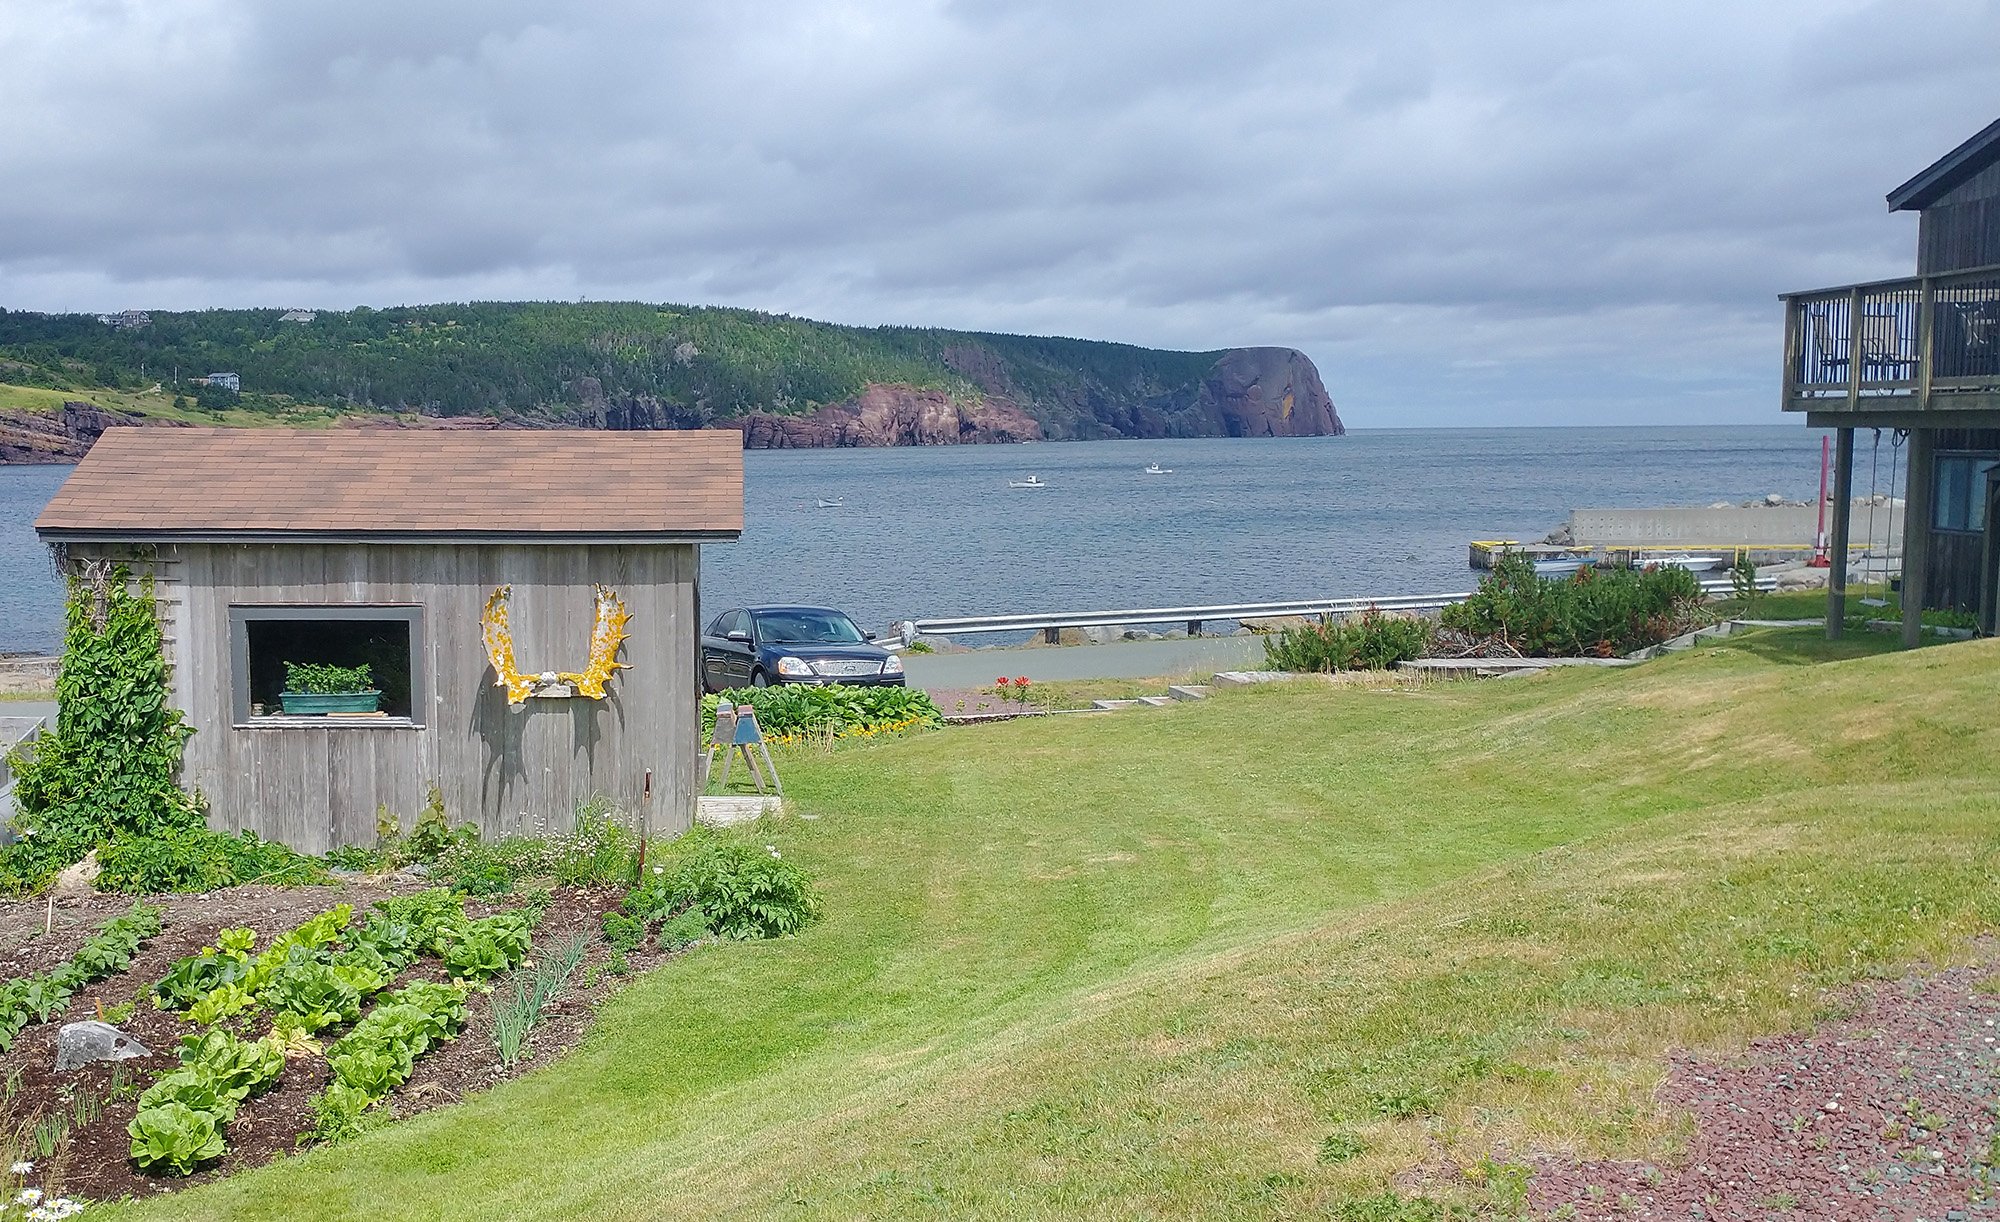 Shacks n' coves. Welcome to Newfoundland.